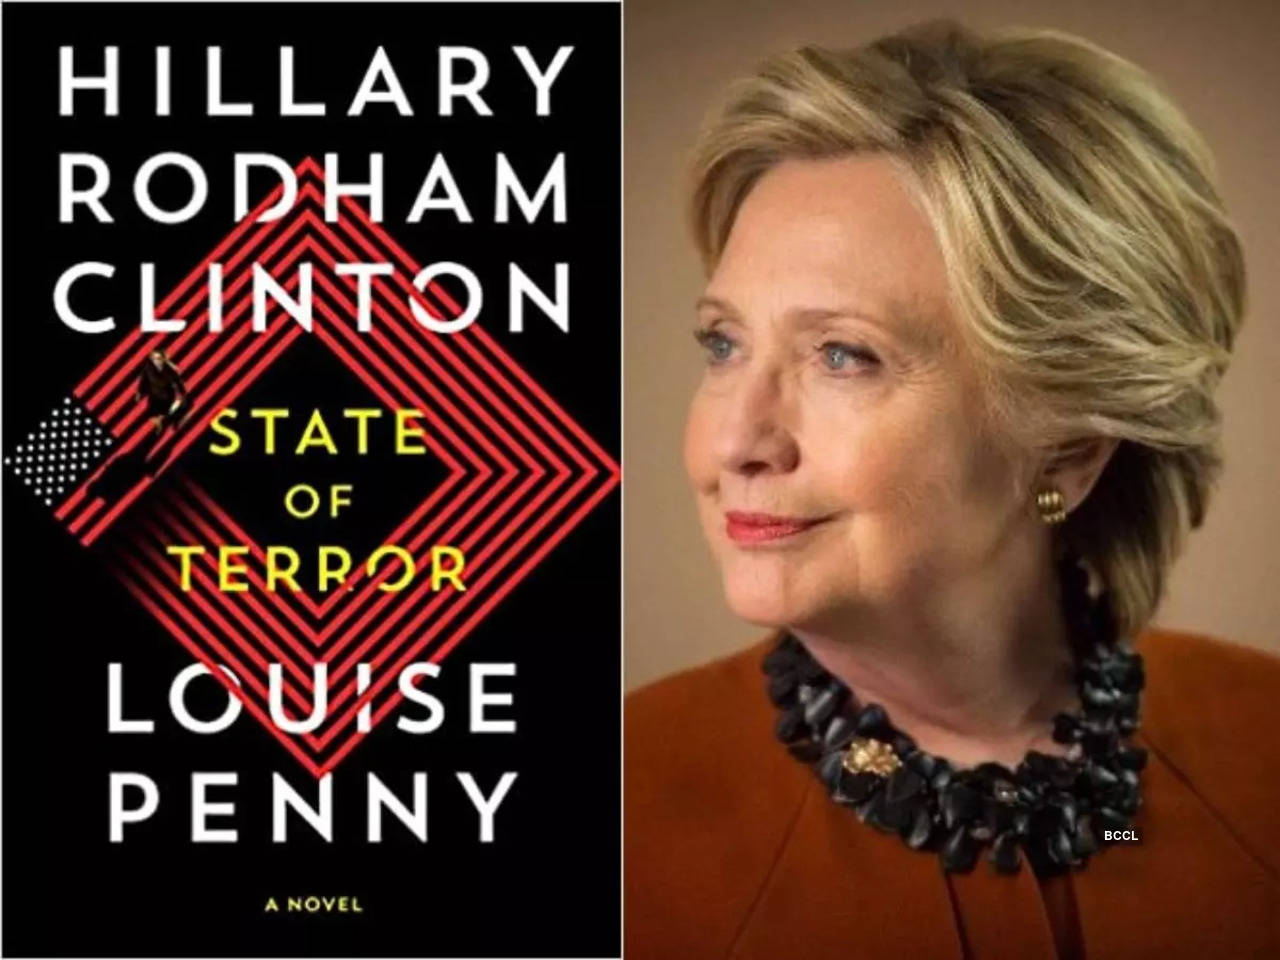 Micro review: 'State of Terror' by Hillary Rodham Clinton and